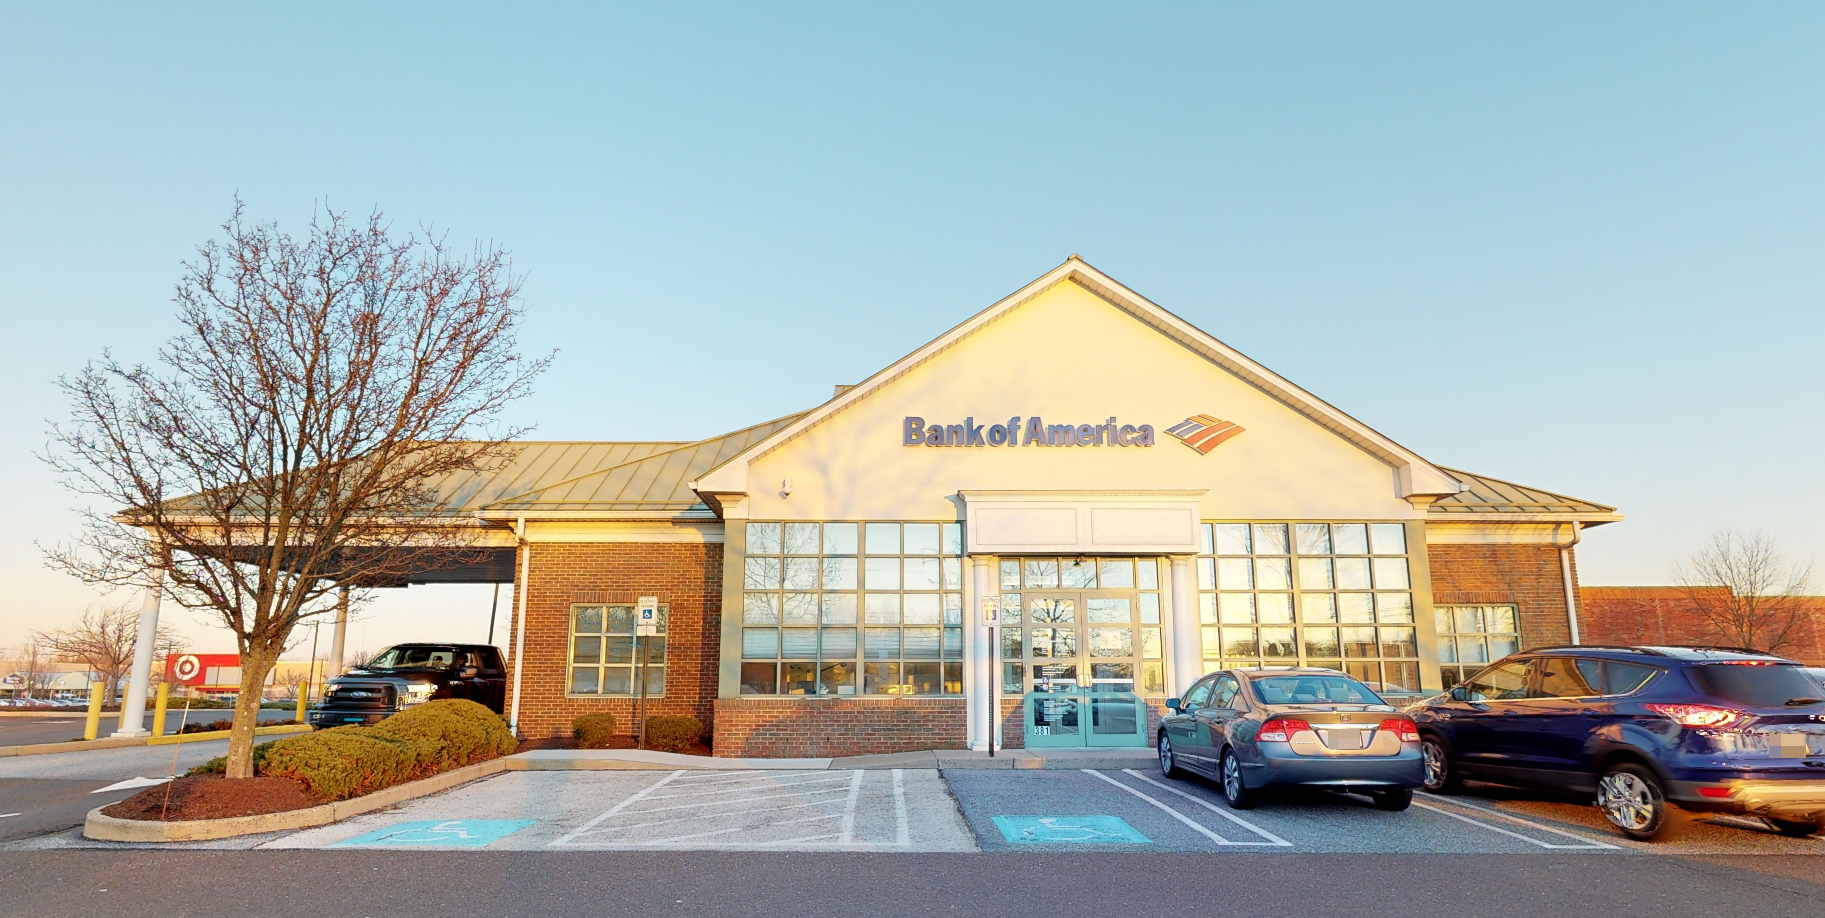 Bank of America financial center with drive-thru ATM | 381 Easton Rd, Warrington, PA 18976